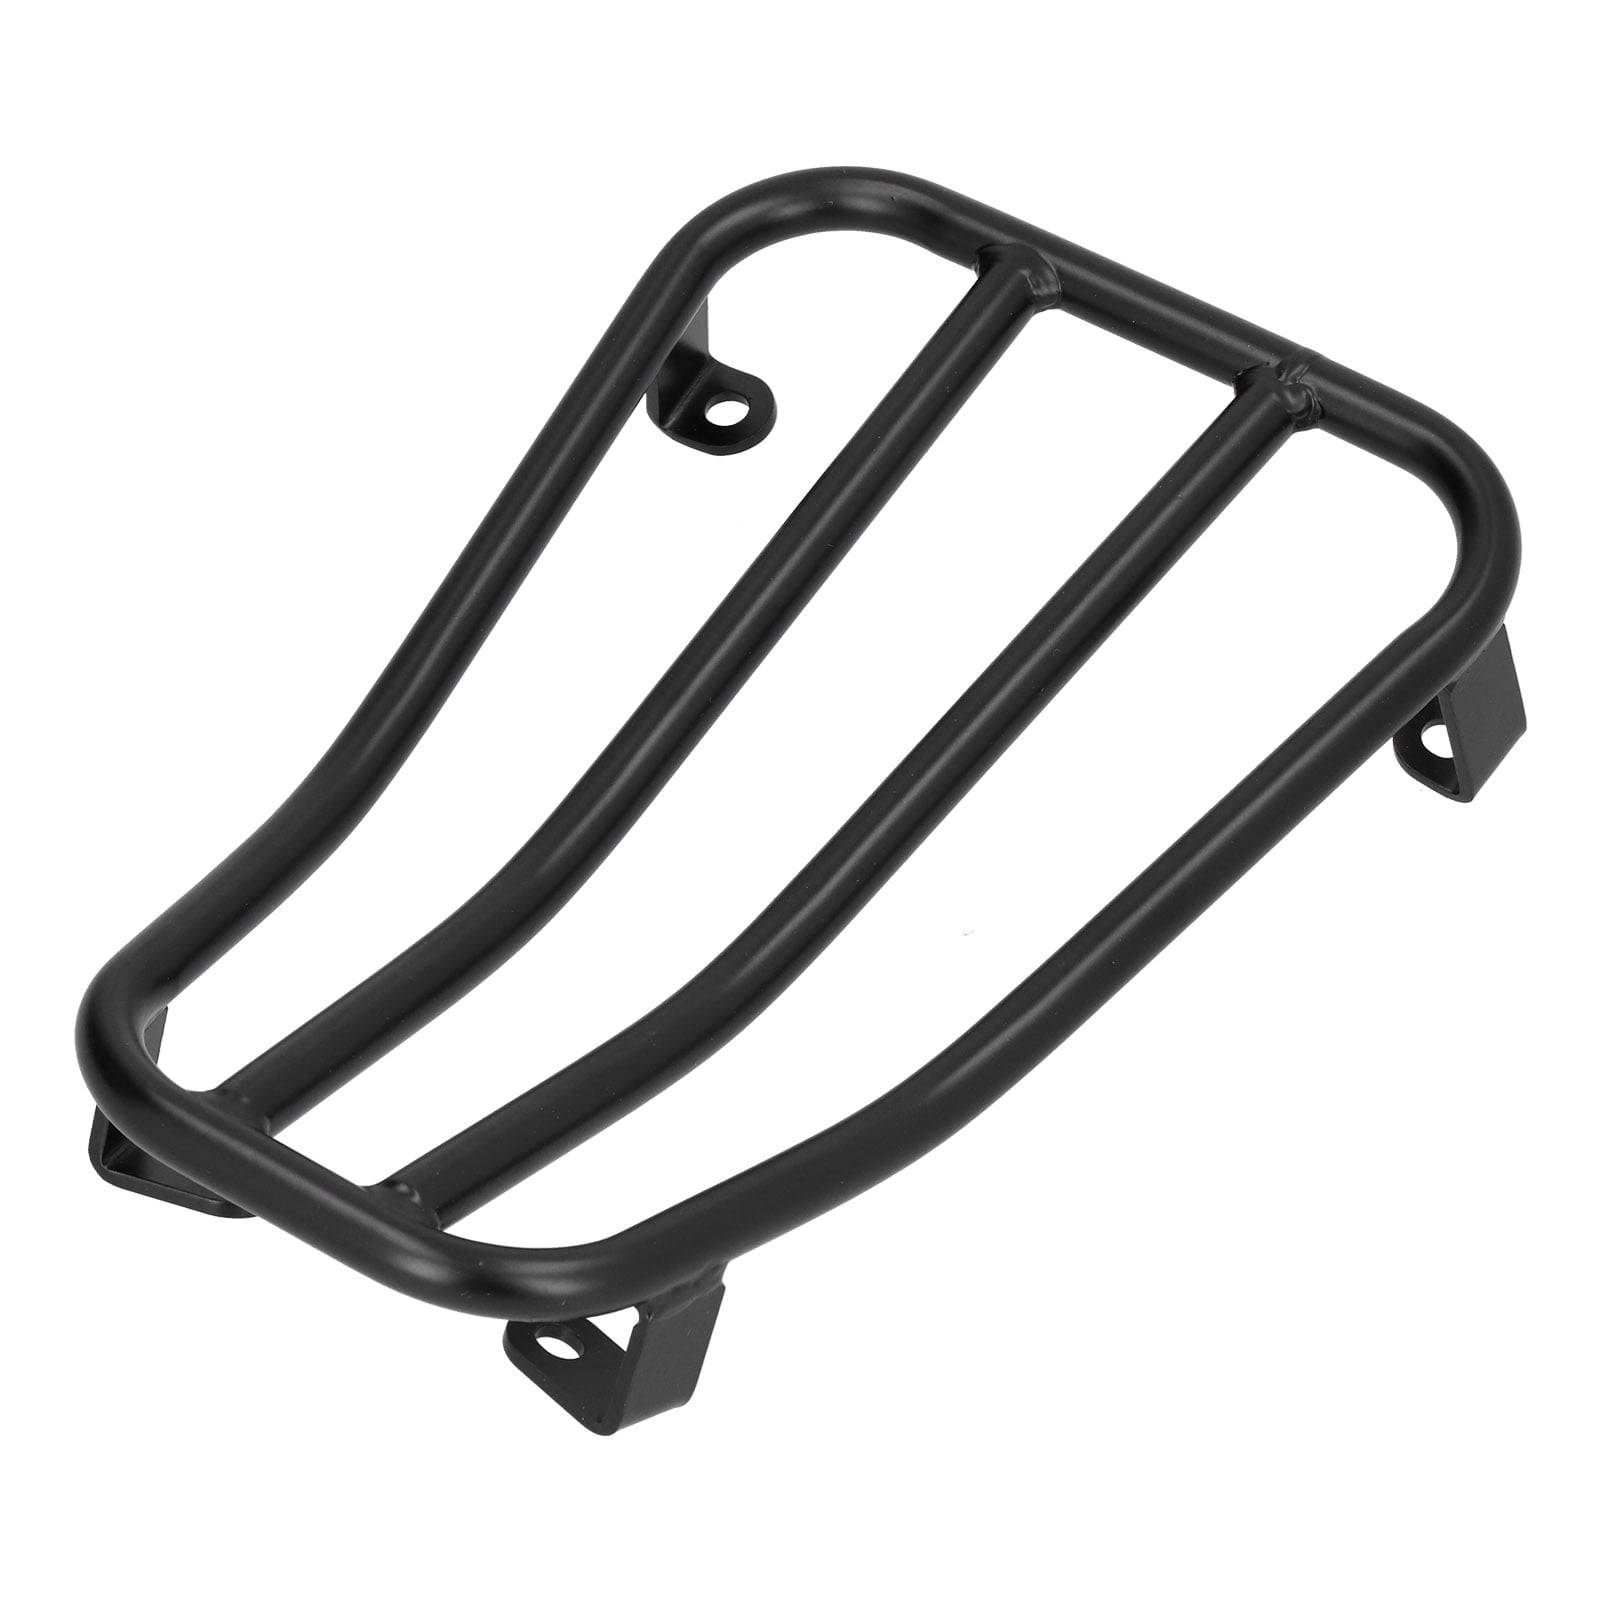 Buy EBTOOLS Rear Luggage Carrier Rack Support Bracket Foot Pedal For ...